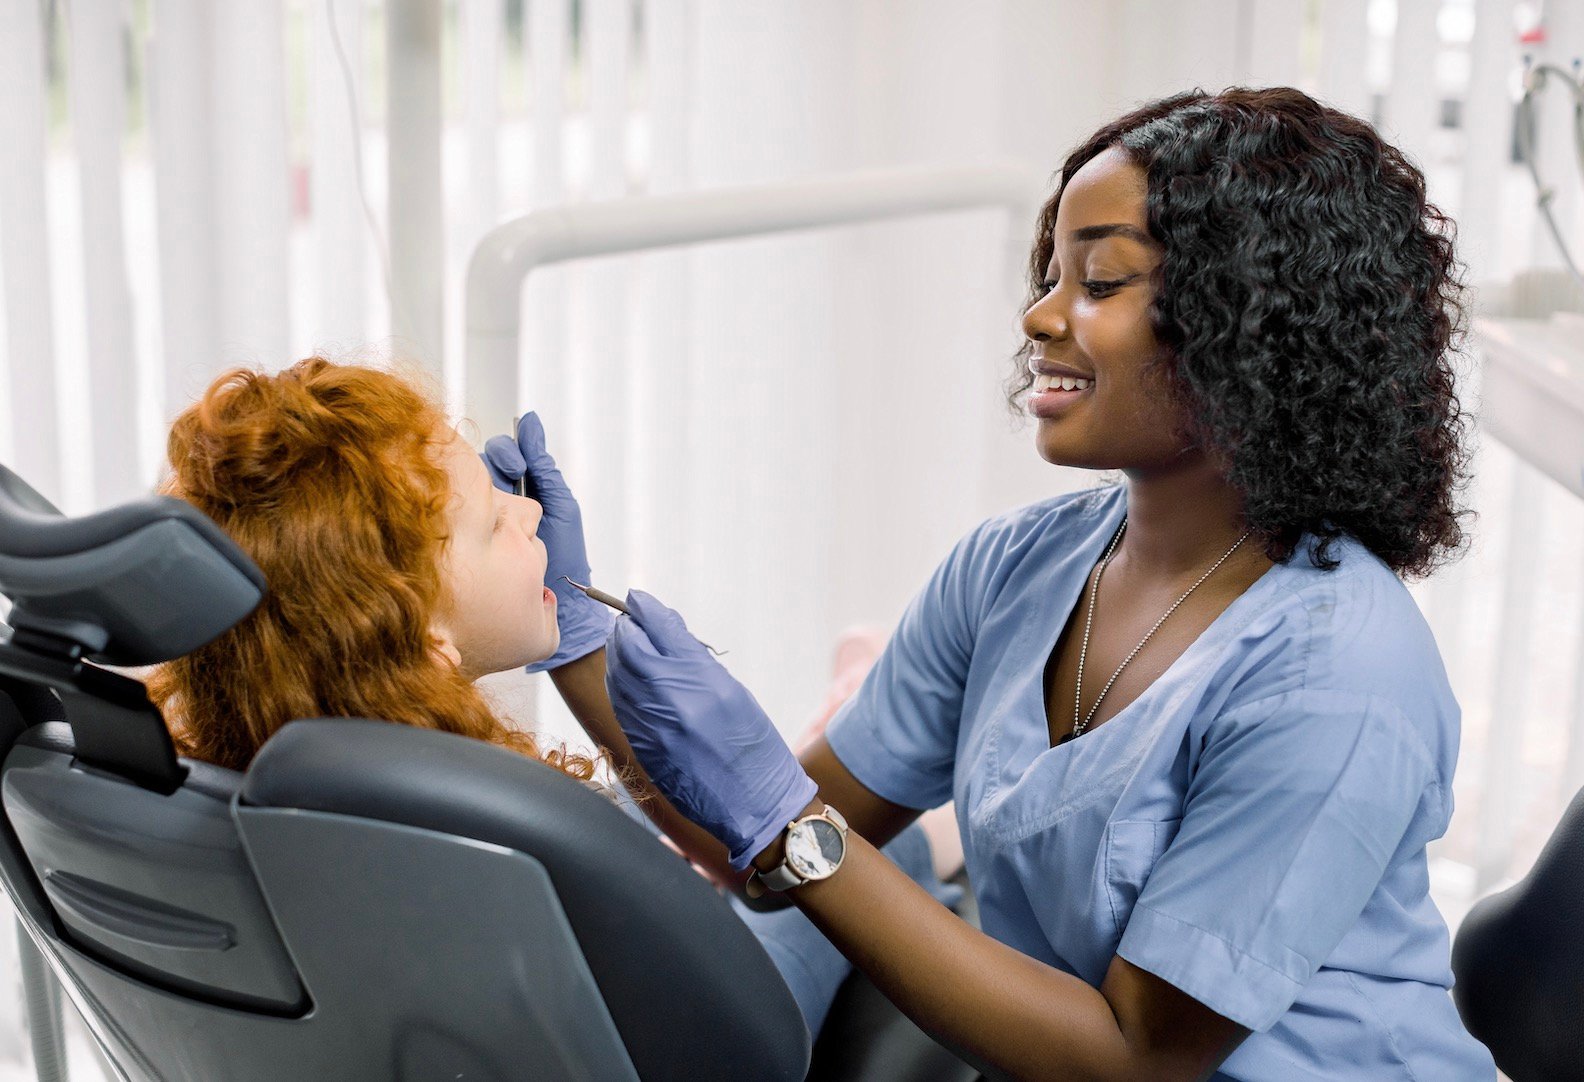 Dental Assistant Course Requirements at TUT